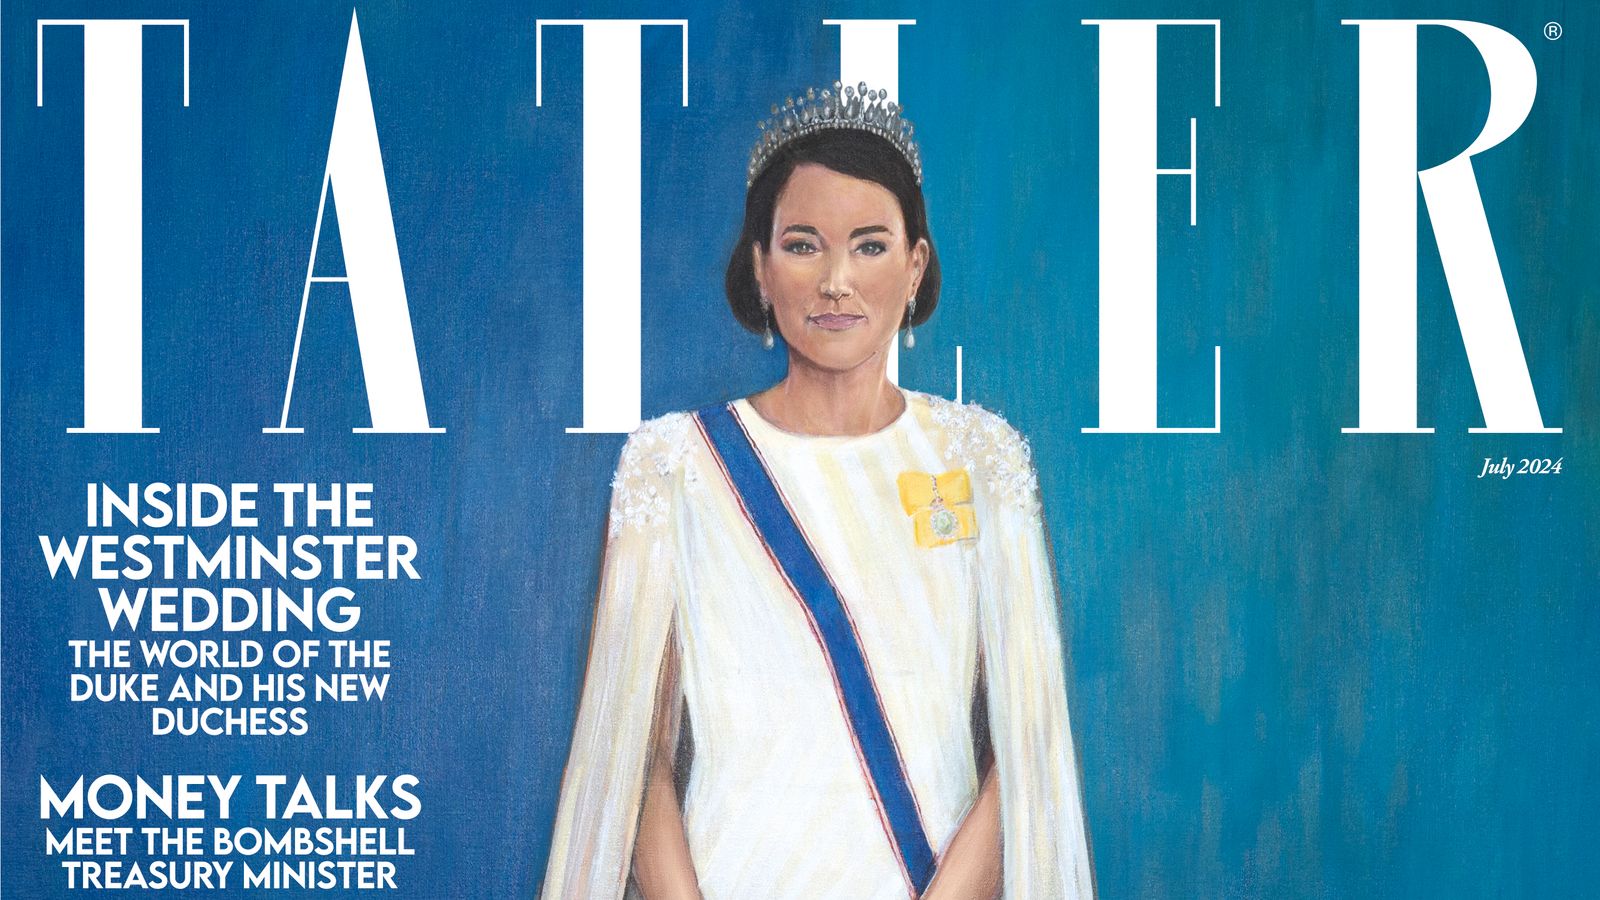 Portrait of Kate, princess of Wales, appears on Tatler magazine - but gets a mixed reception